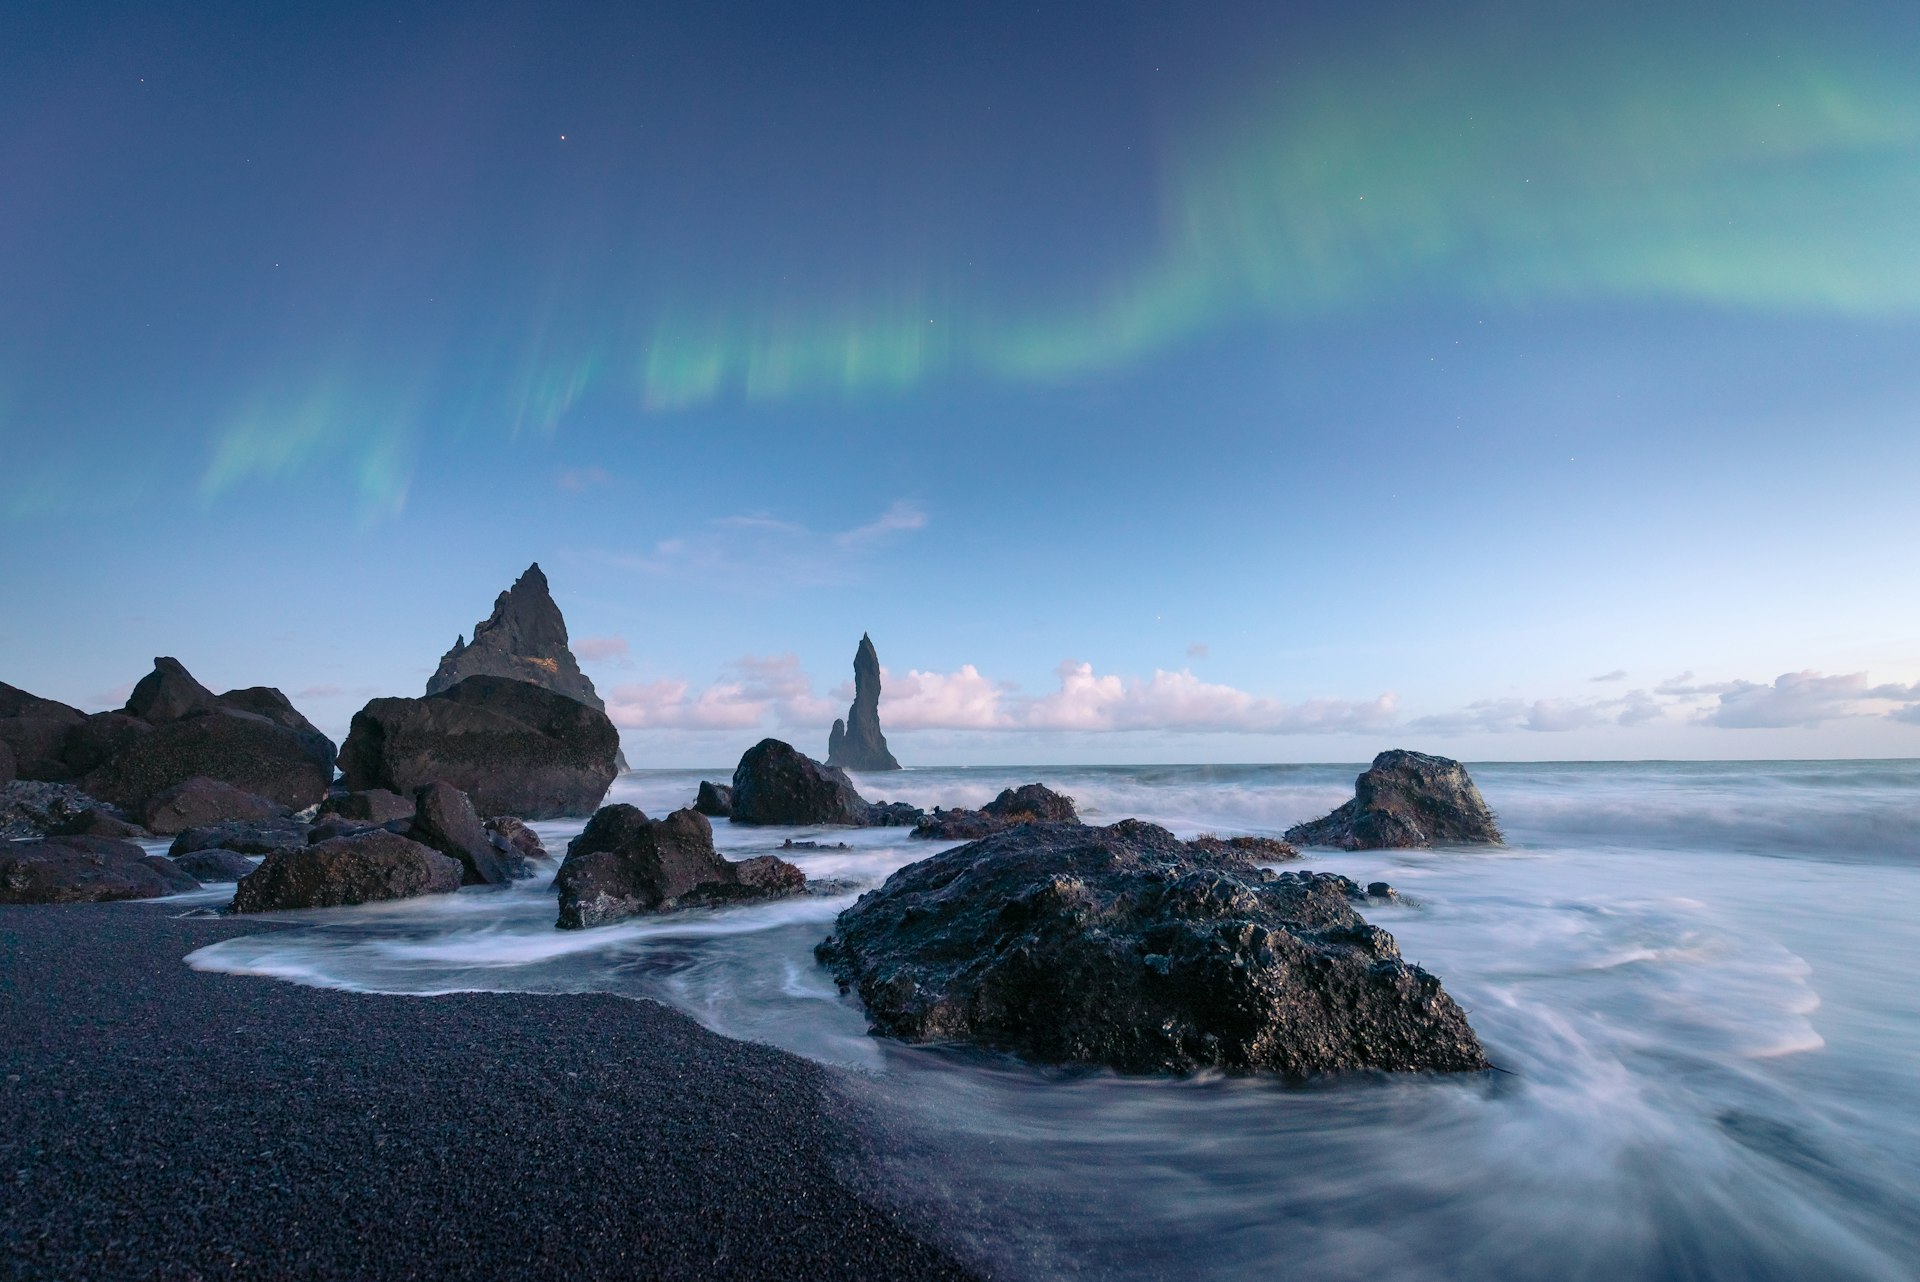 A dark-sand volcanic beach with several jagged rocky outcrops out at sea. A green streak of the northern lights dances across the sky